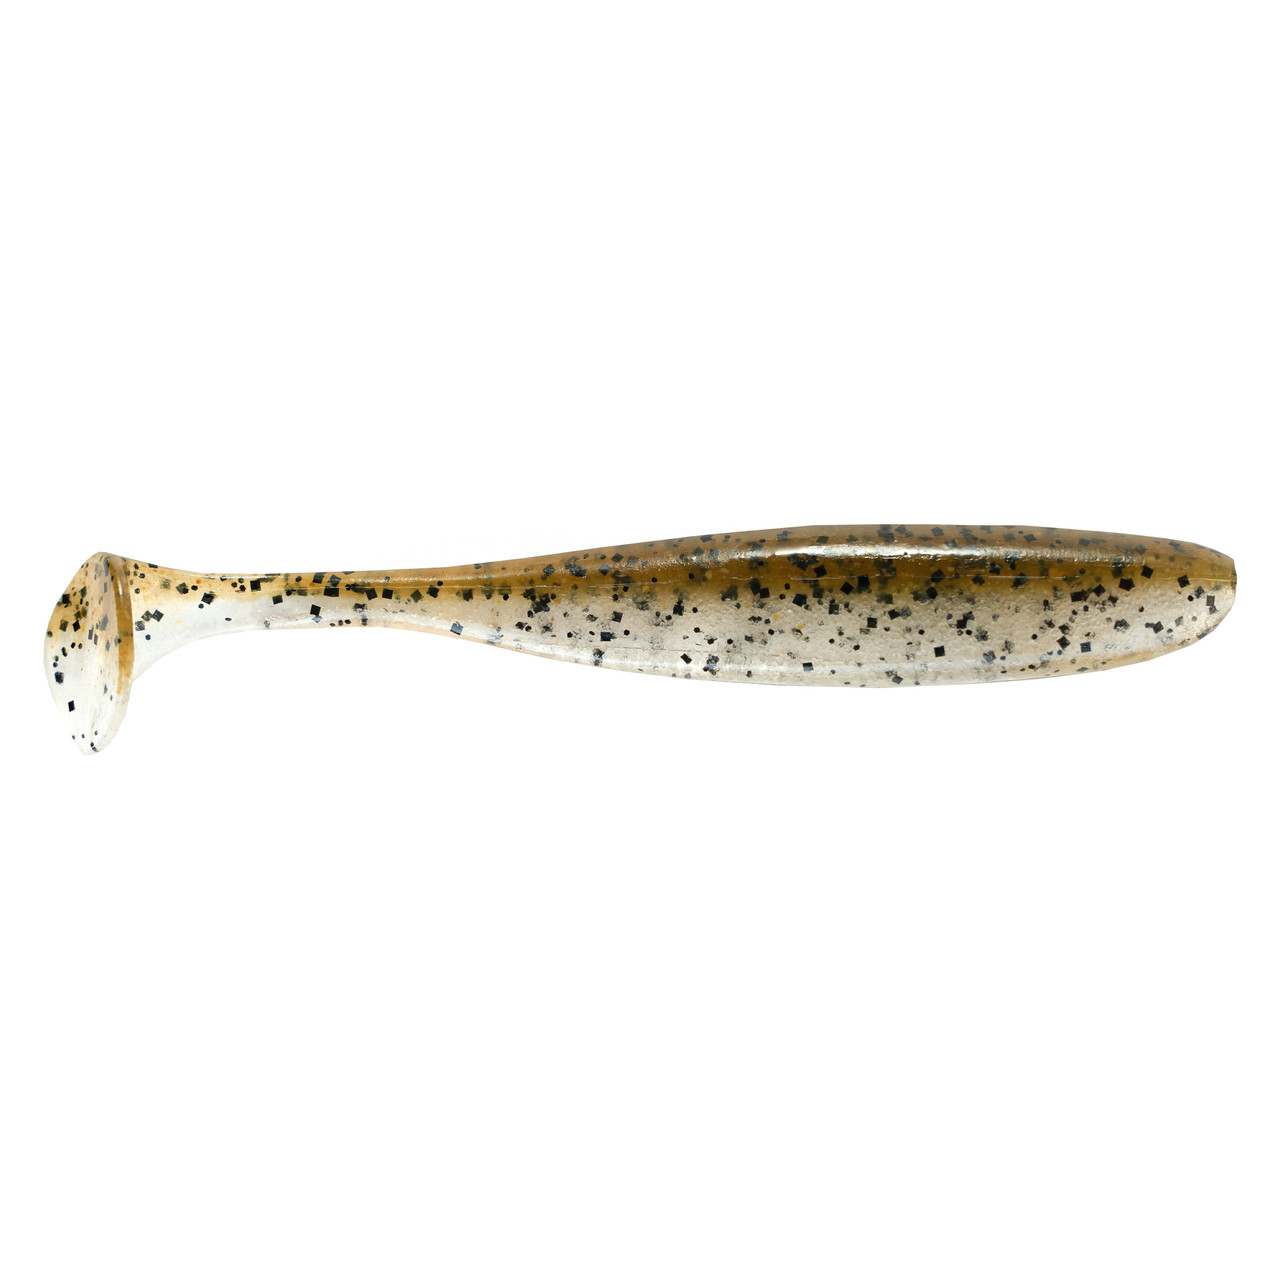 Keitech Easy shiner,Green Pumpkin Shad, 3",10pk, Strong Squid Scent infused